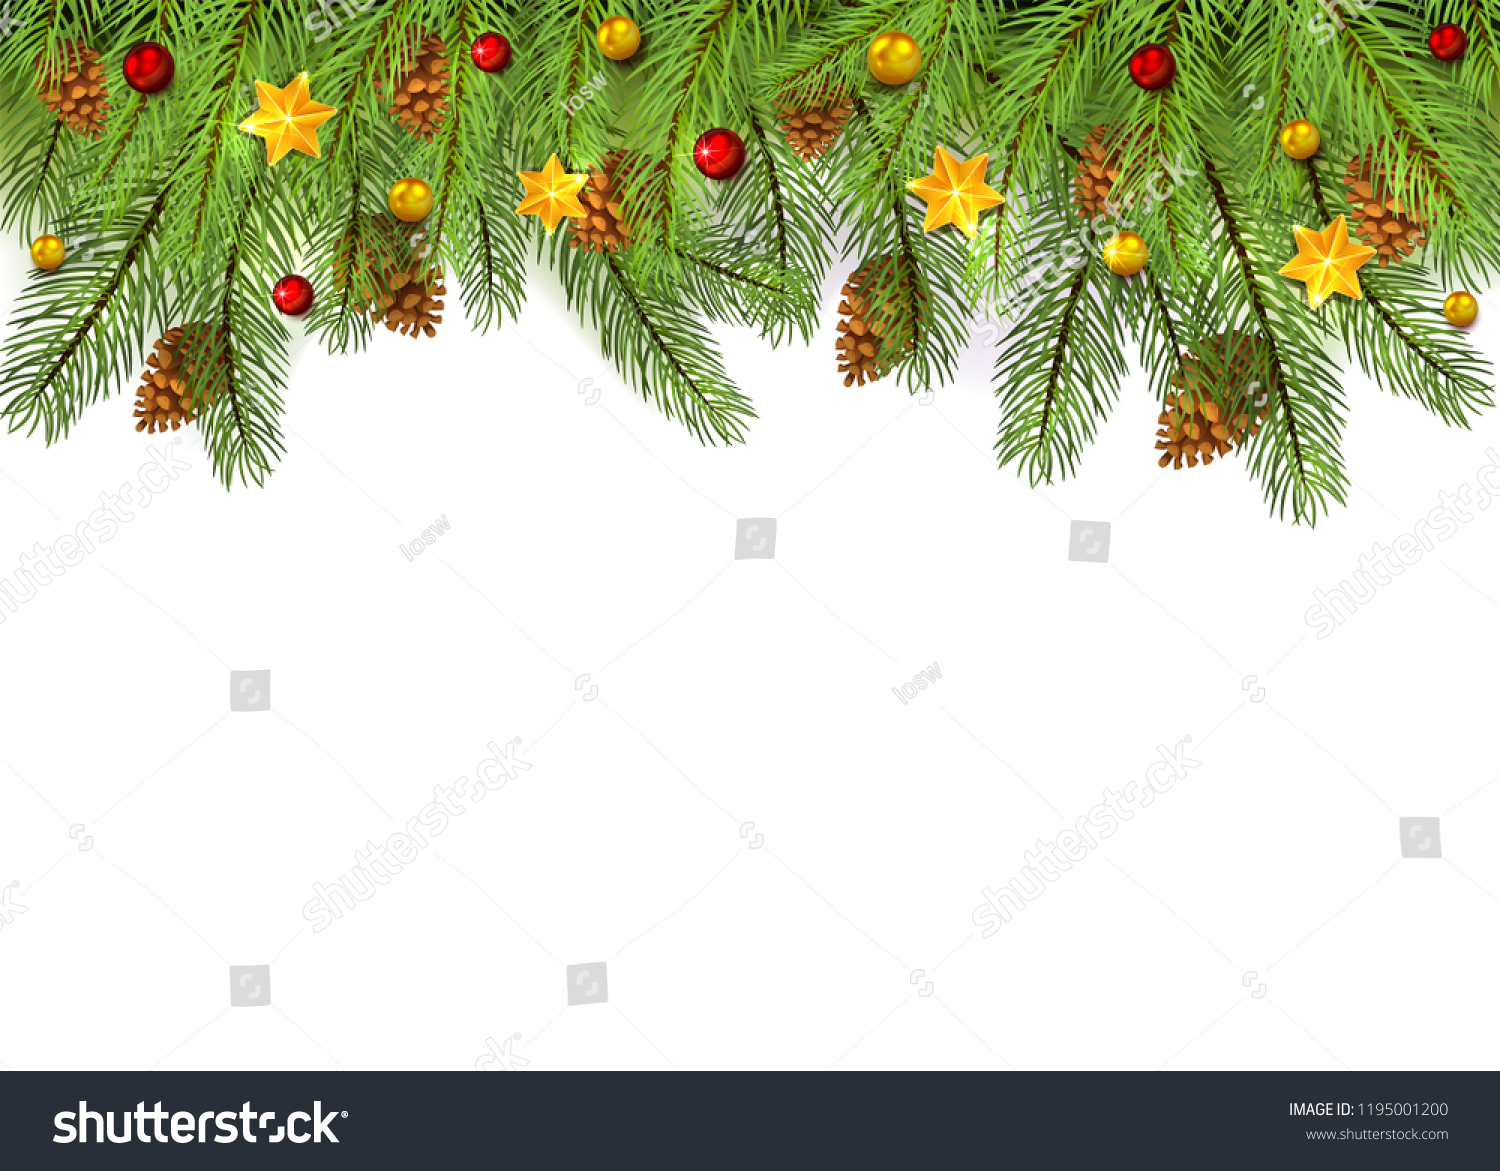 Christmas Decorations with stars and fir tree branches on white holiday background, illustration. #1195001200